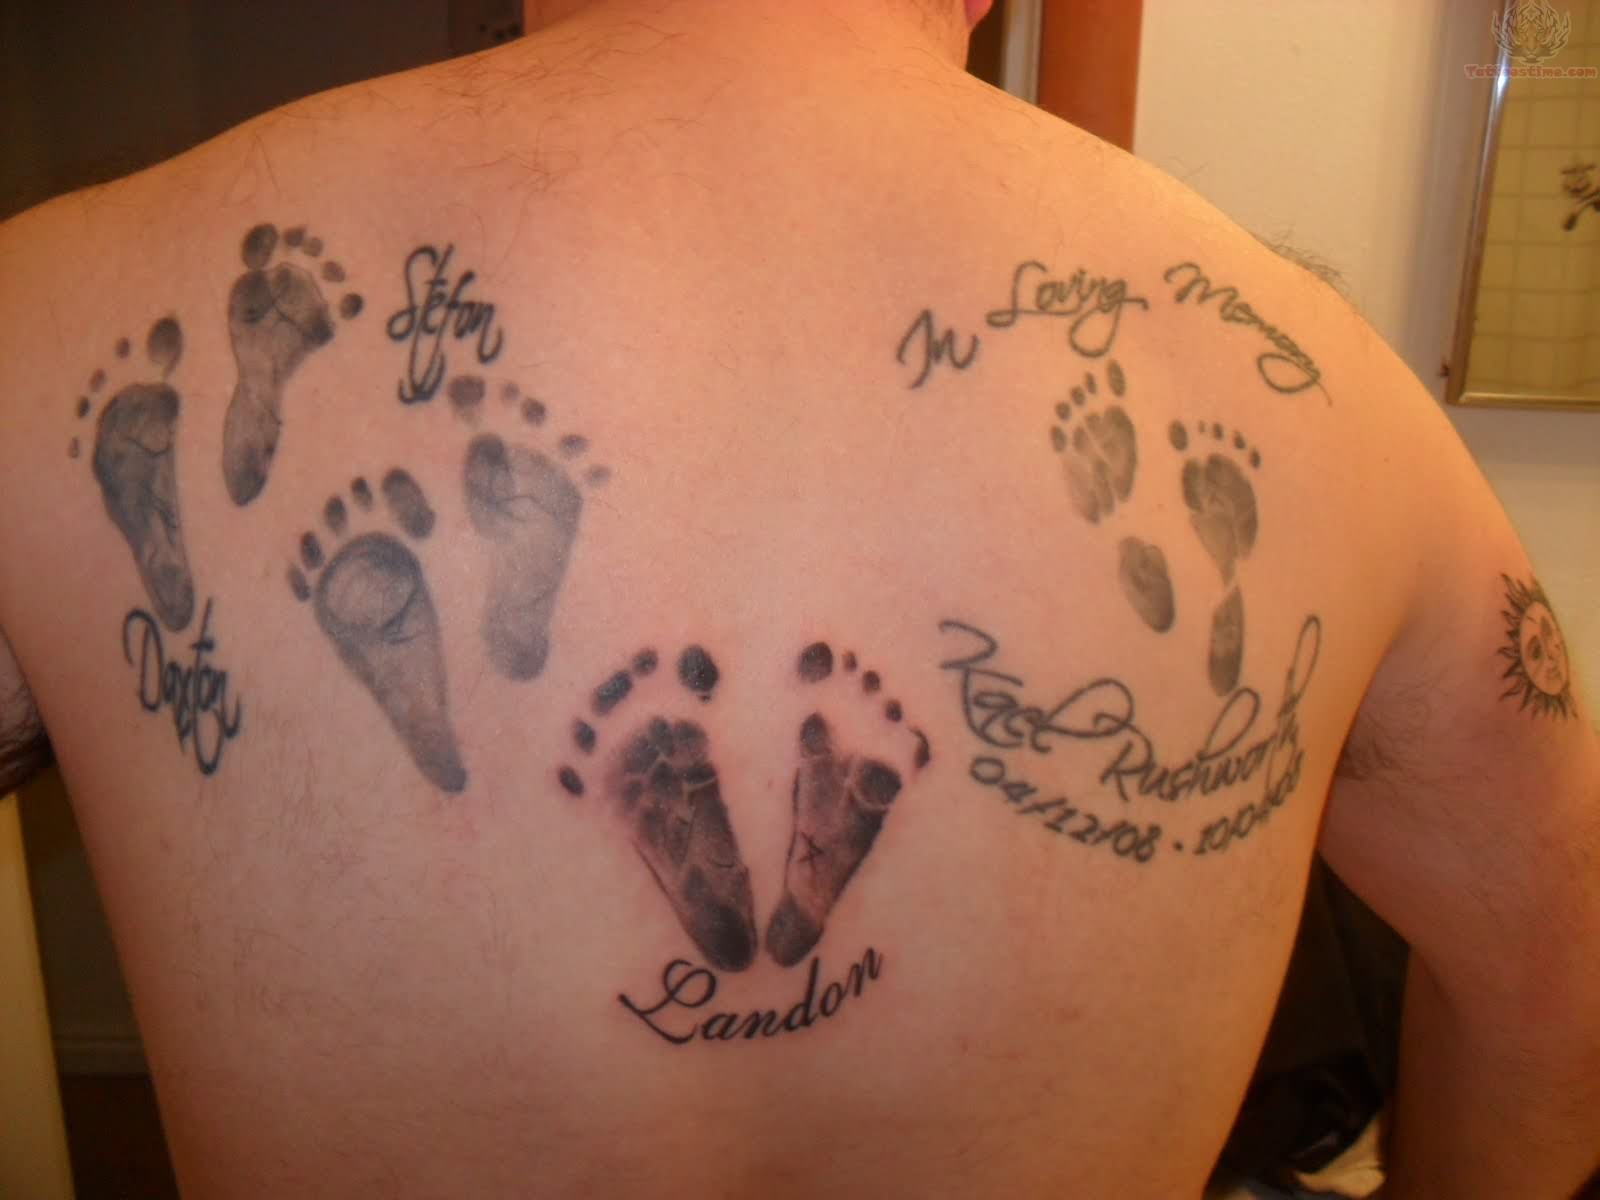 Footprint Tattoos Designs, Ideas and Meaning | Tattoos For You